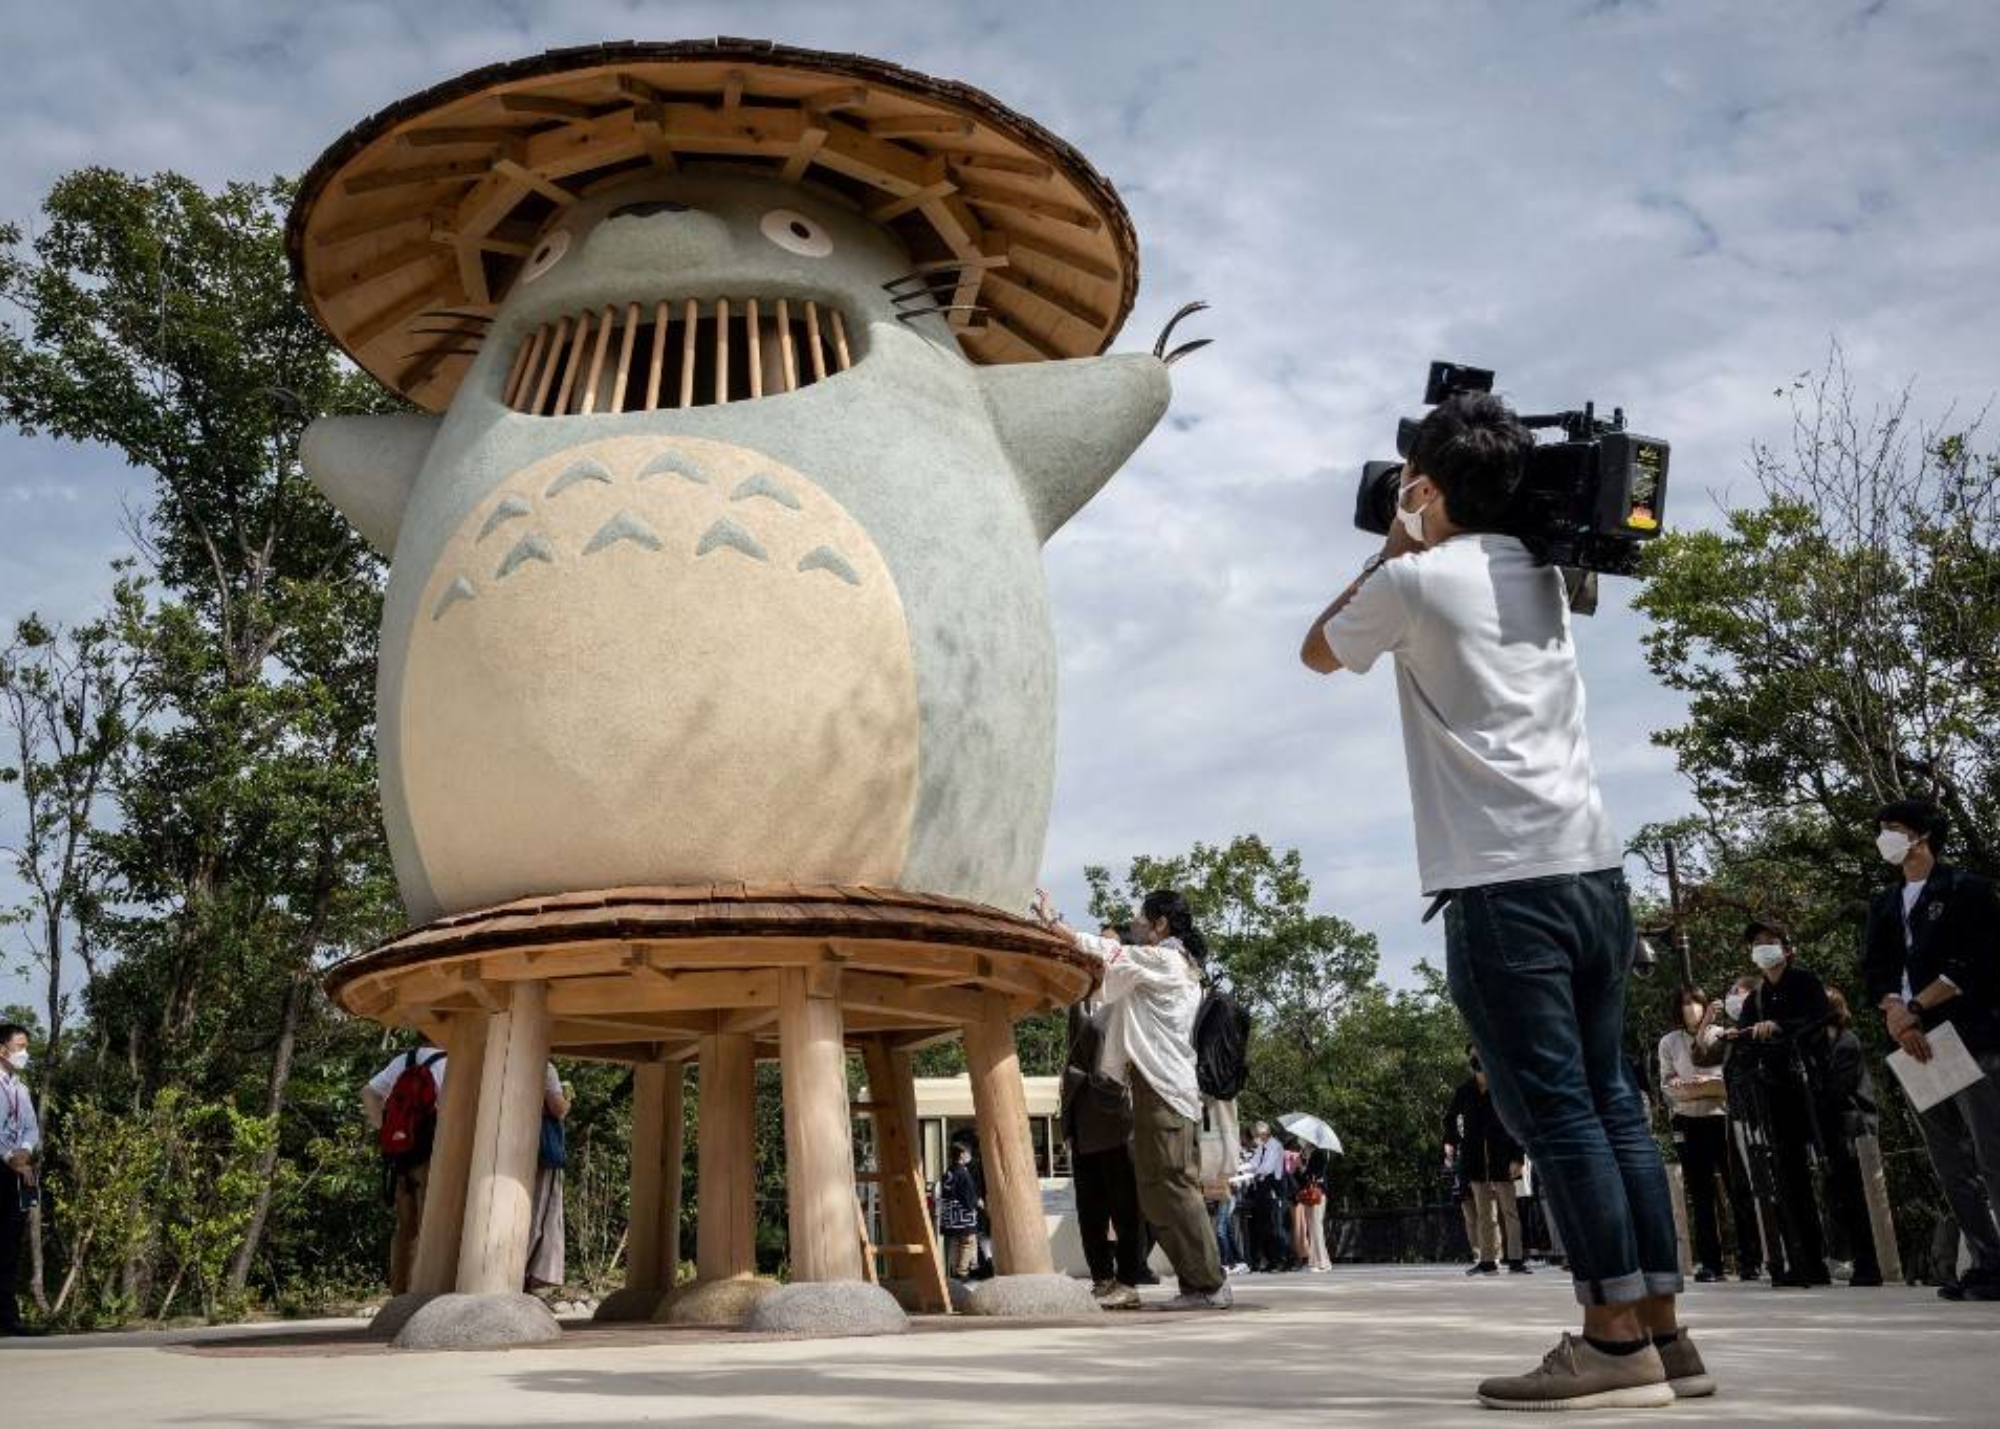 At Dondoko Forest, a member of the press takes a video of an exhibit of the Ghibli character "Totoro"